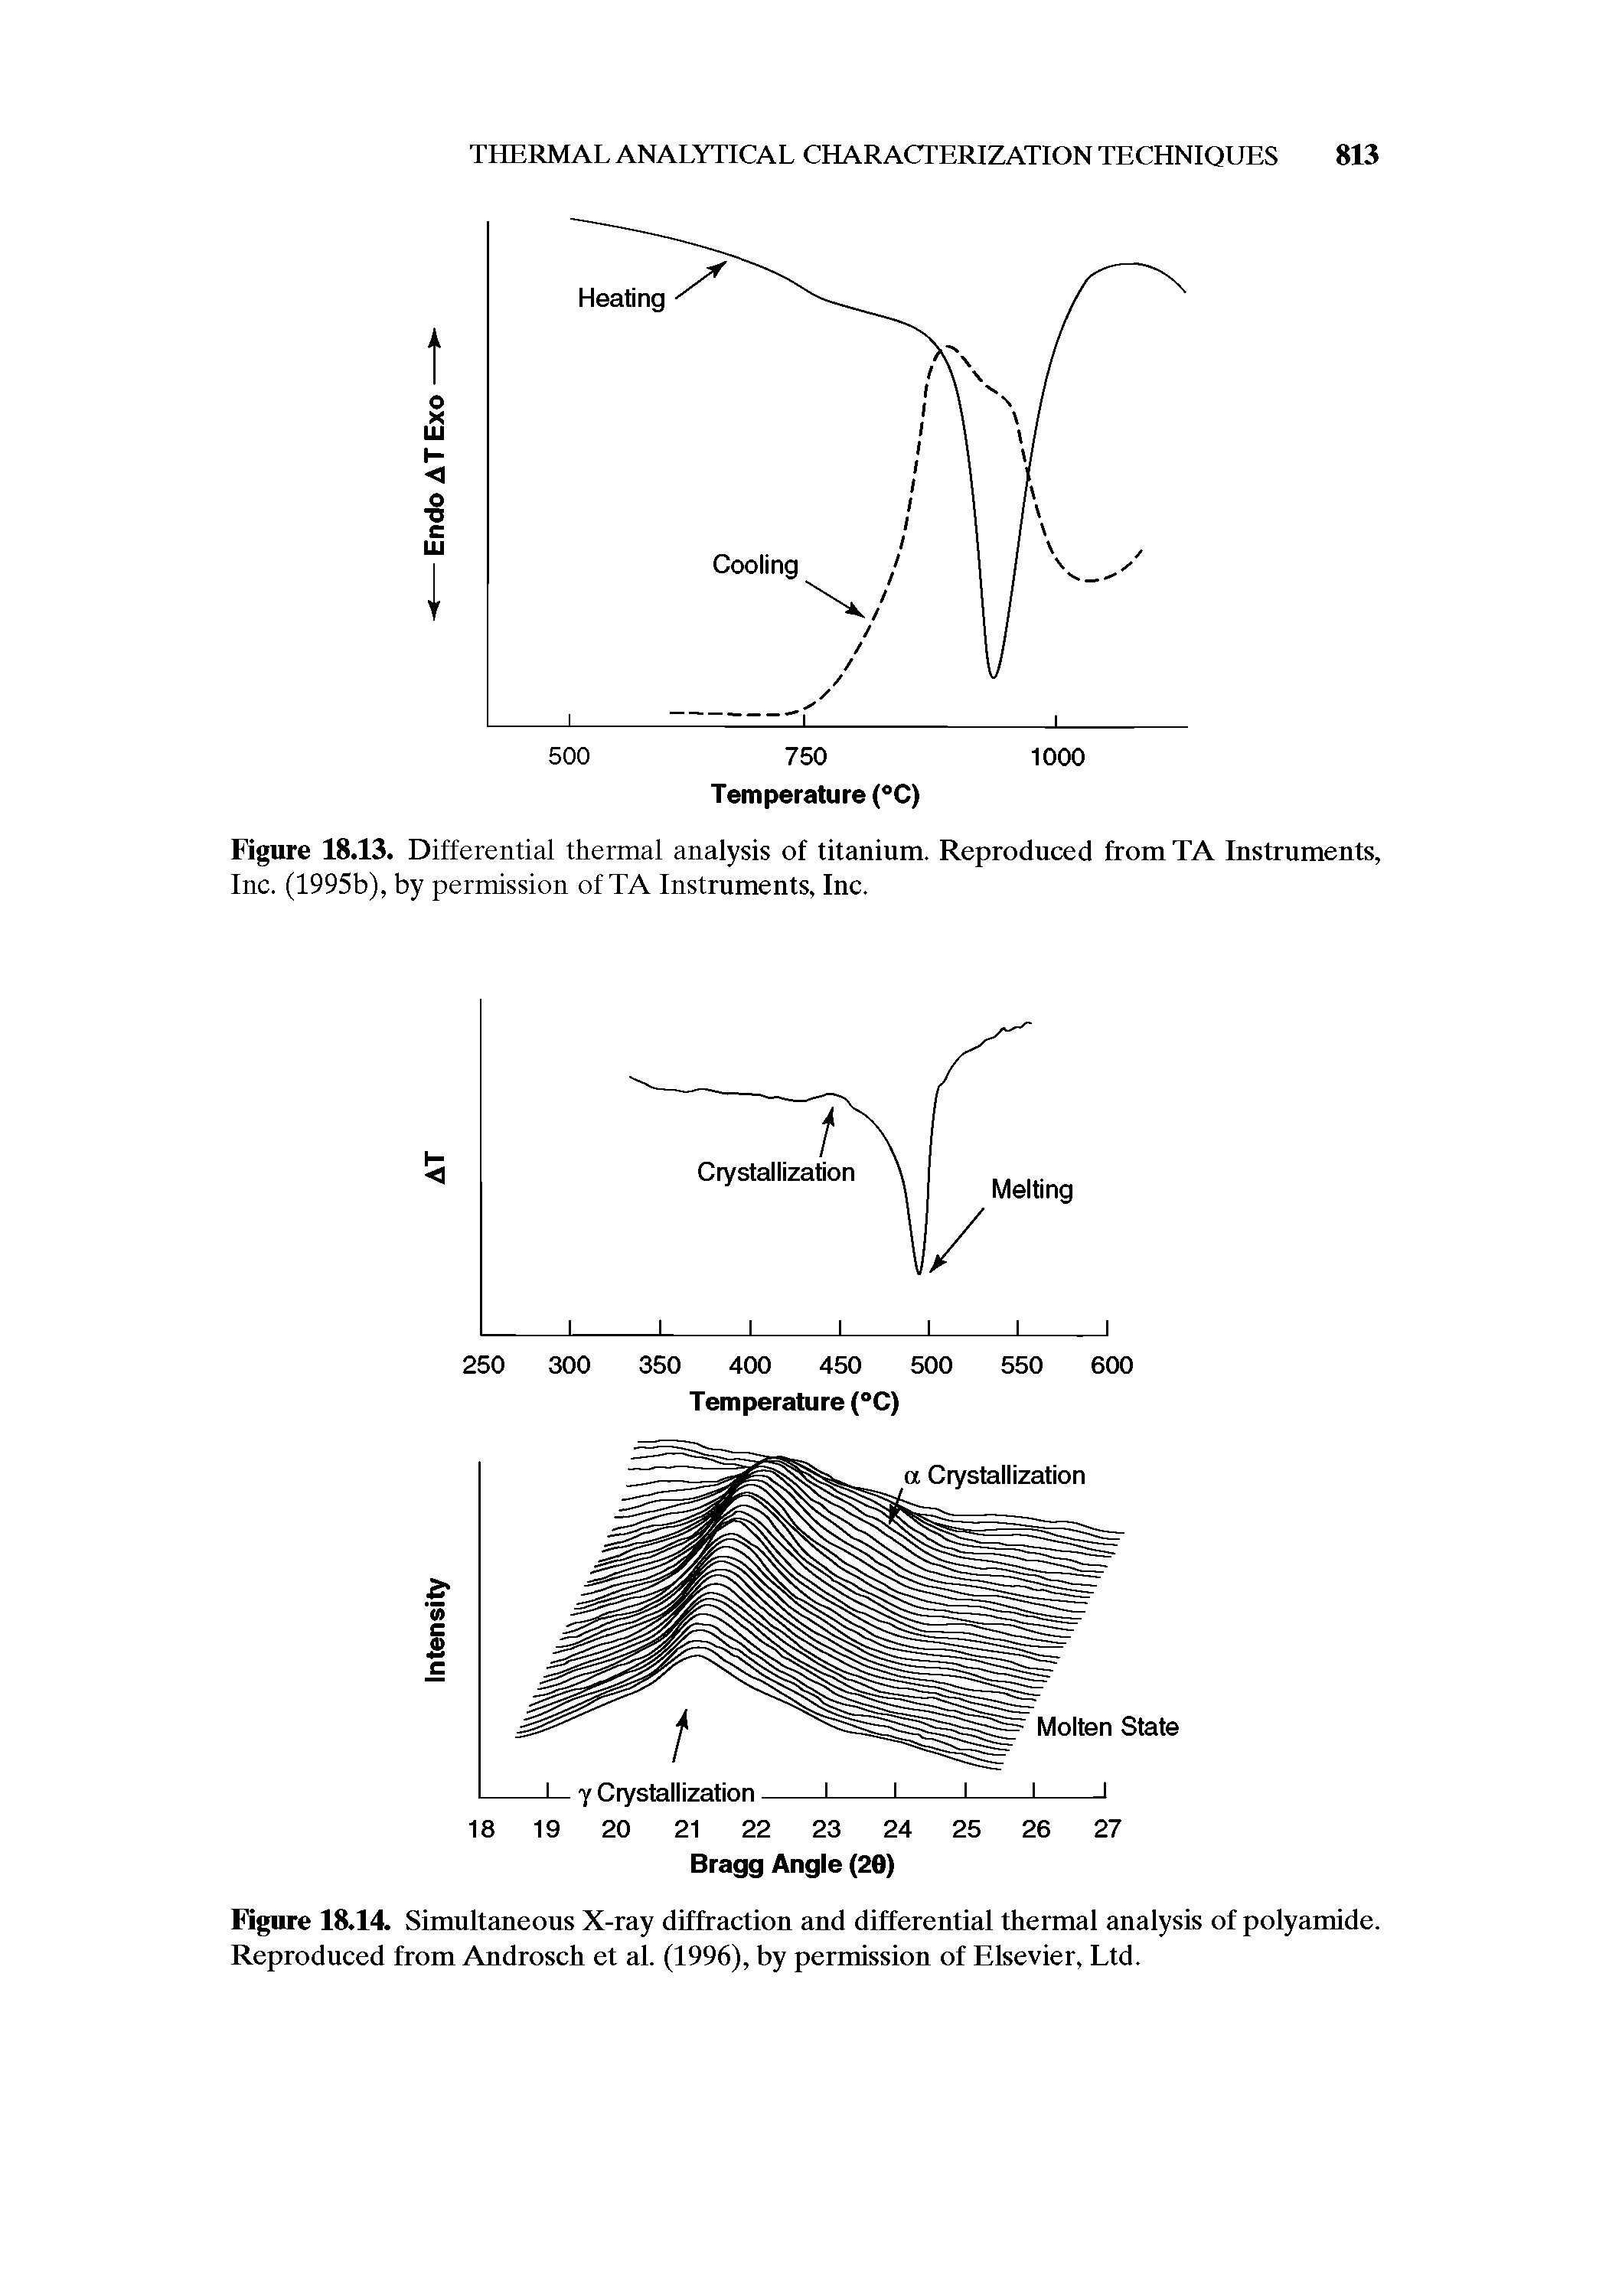 Figure 18.13. Differential thermal analysis of titanium. Reproduced from TA Instruments, Inc. (1995b), by permission of TA Instruments, Inc.